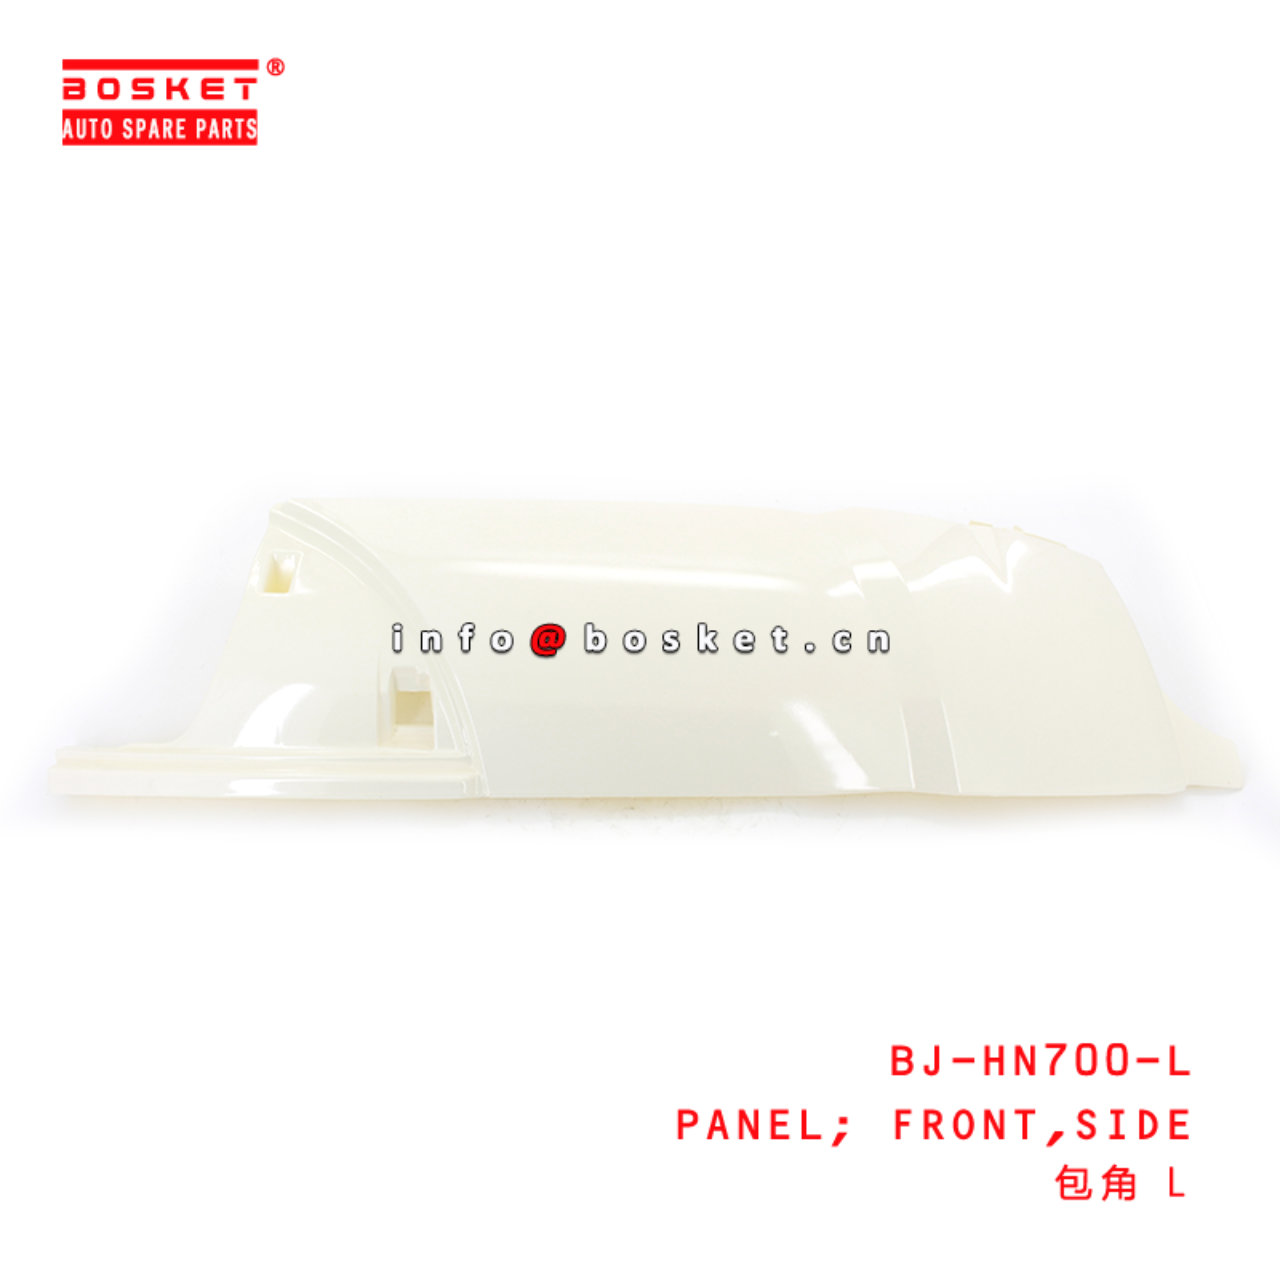 BJ-HN700-L Side Front Panel Suitable for ISUZU HINO700